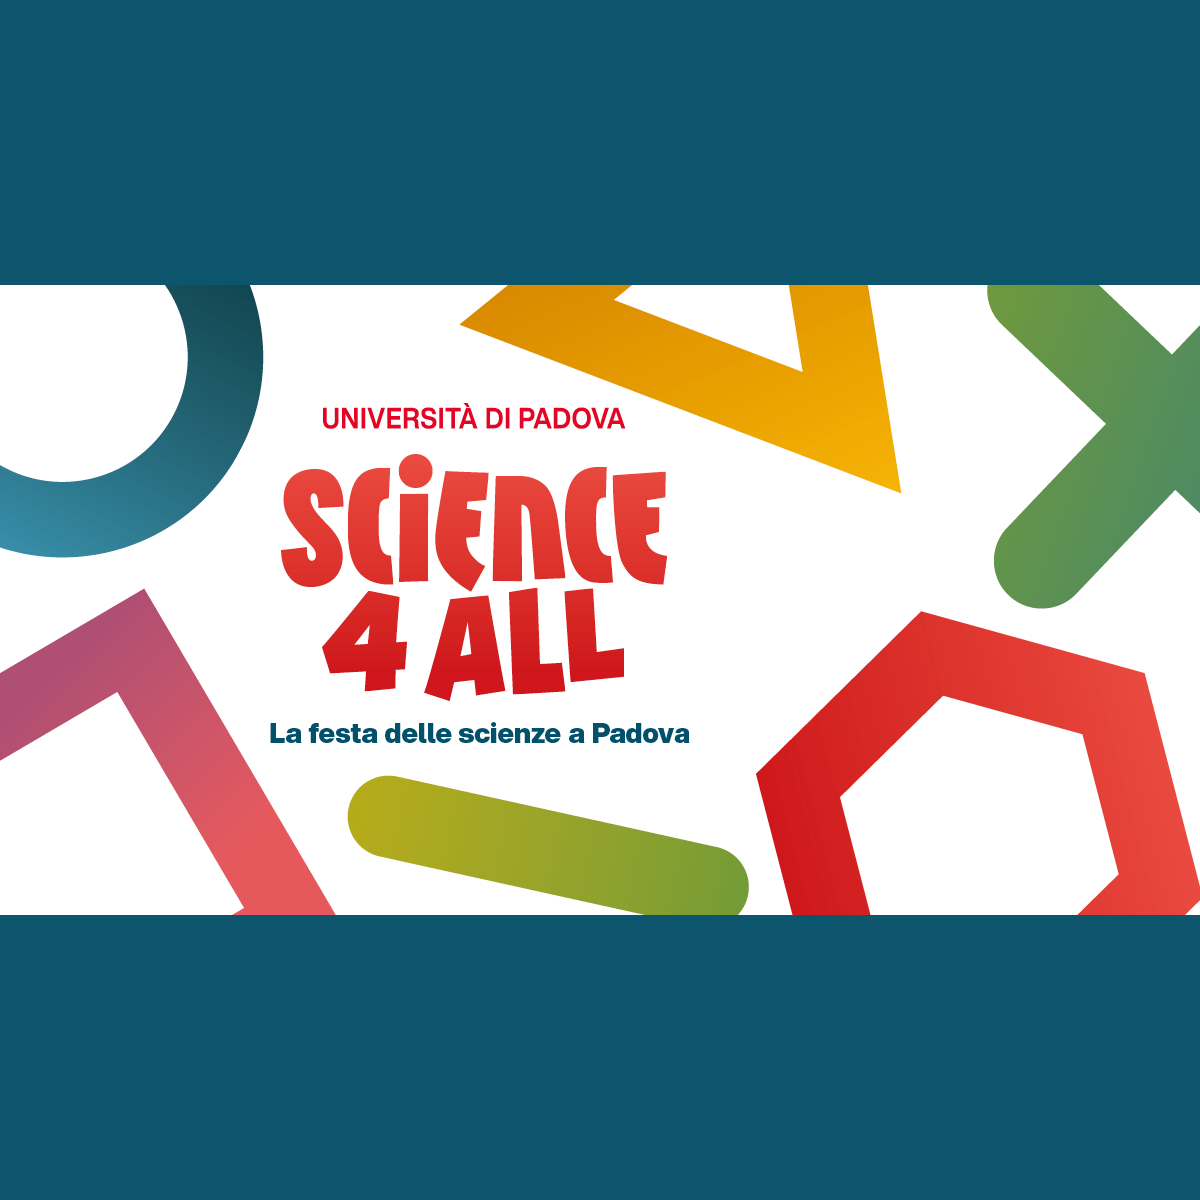 Science 4 All